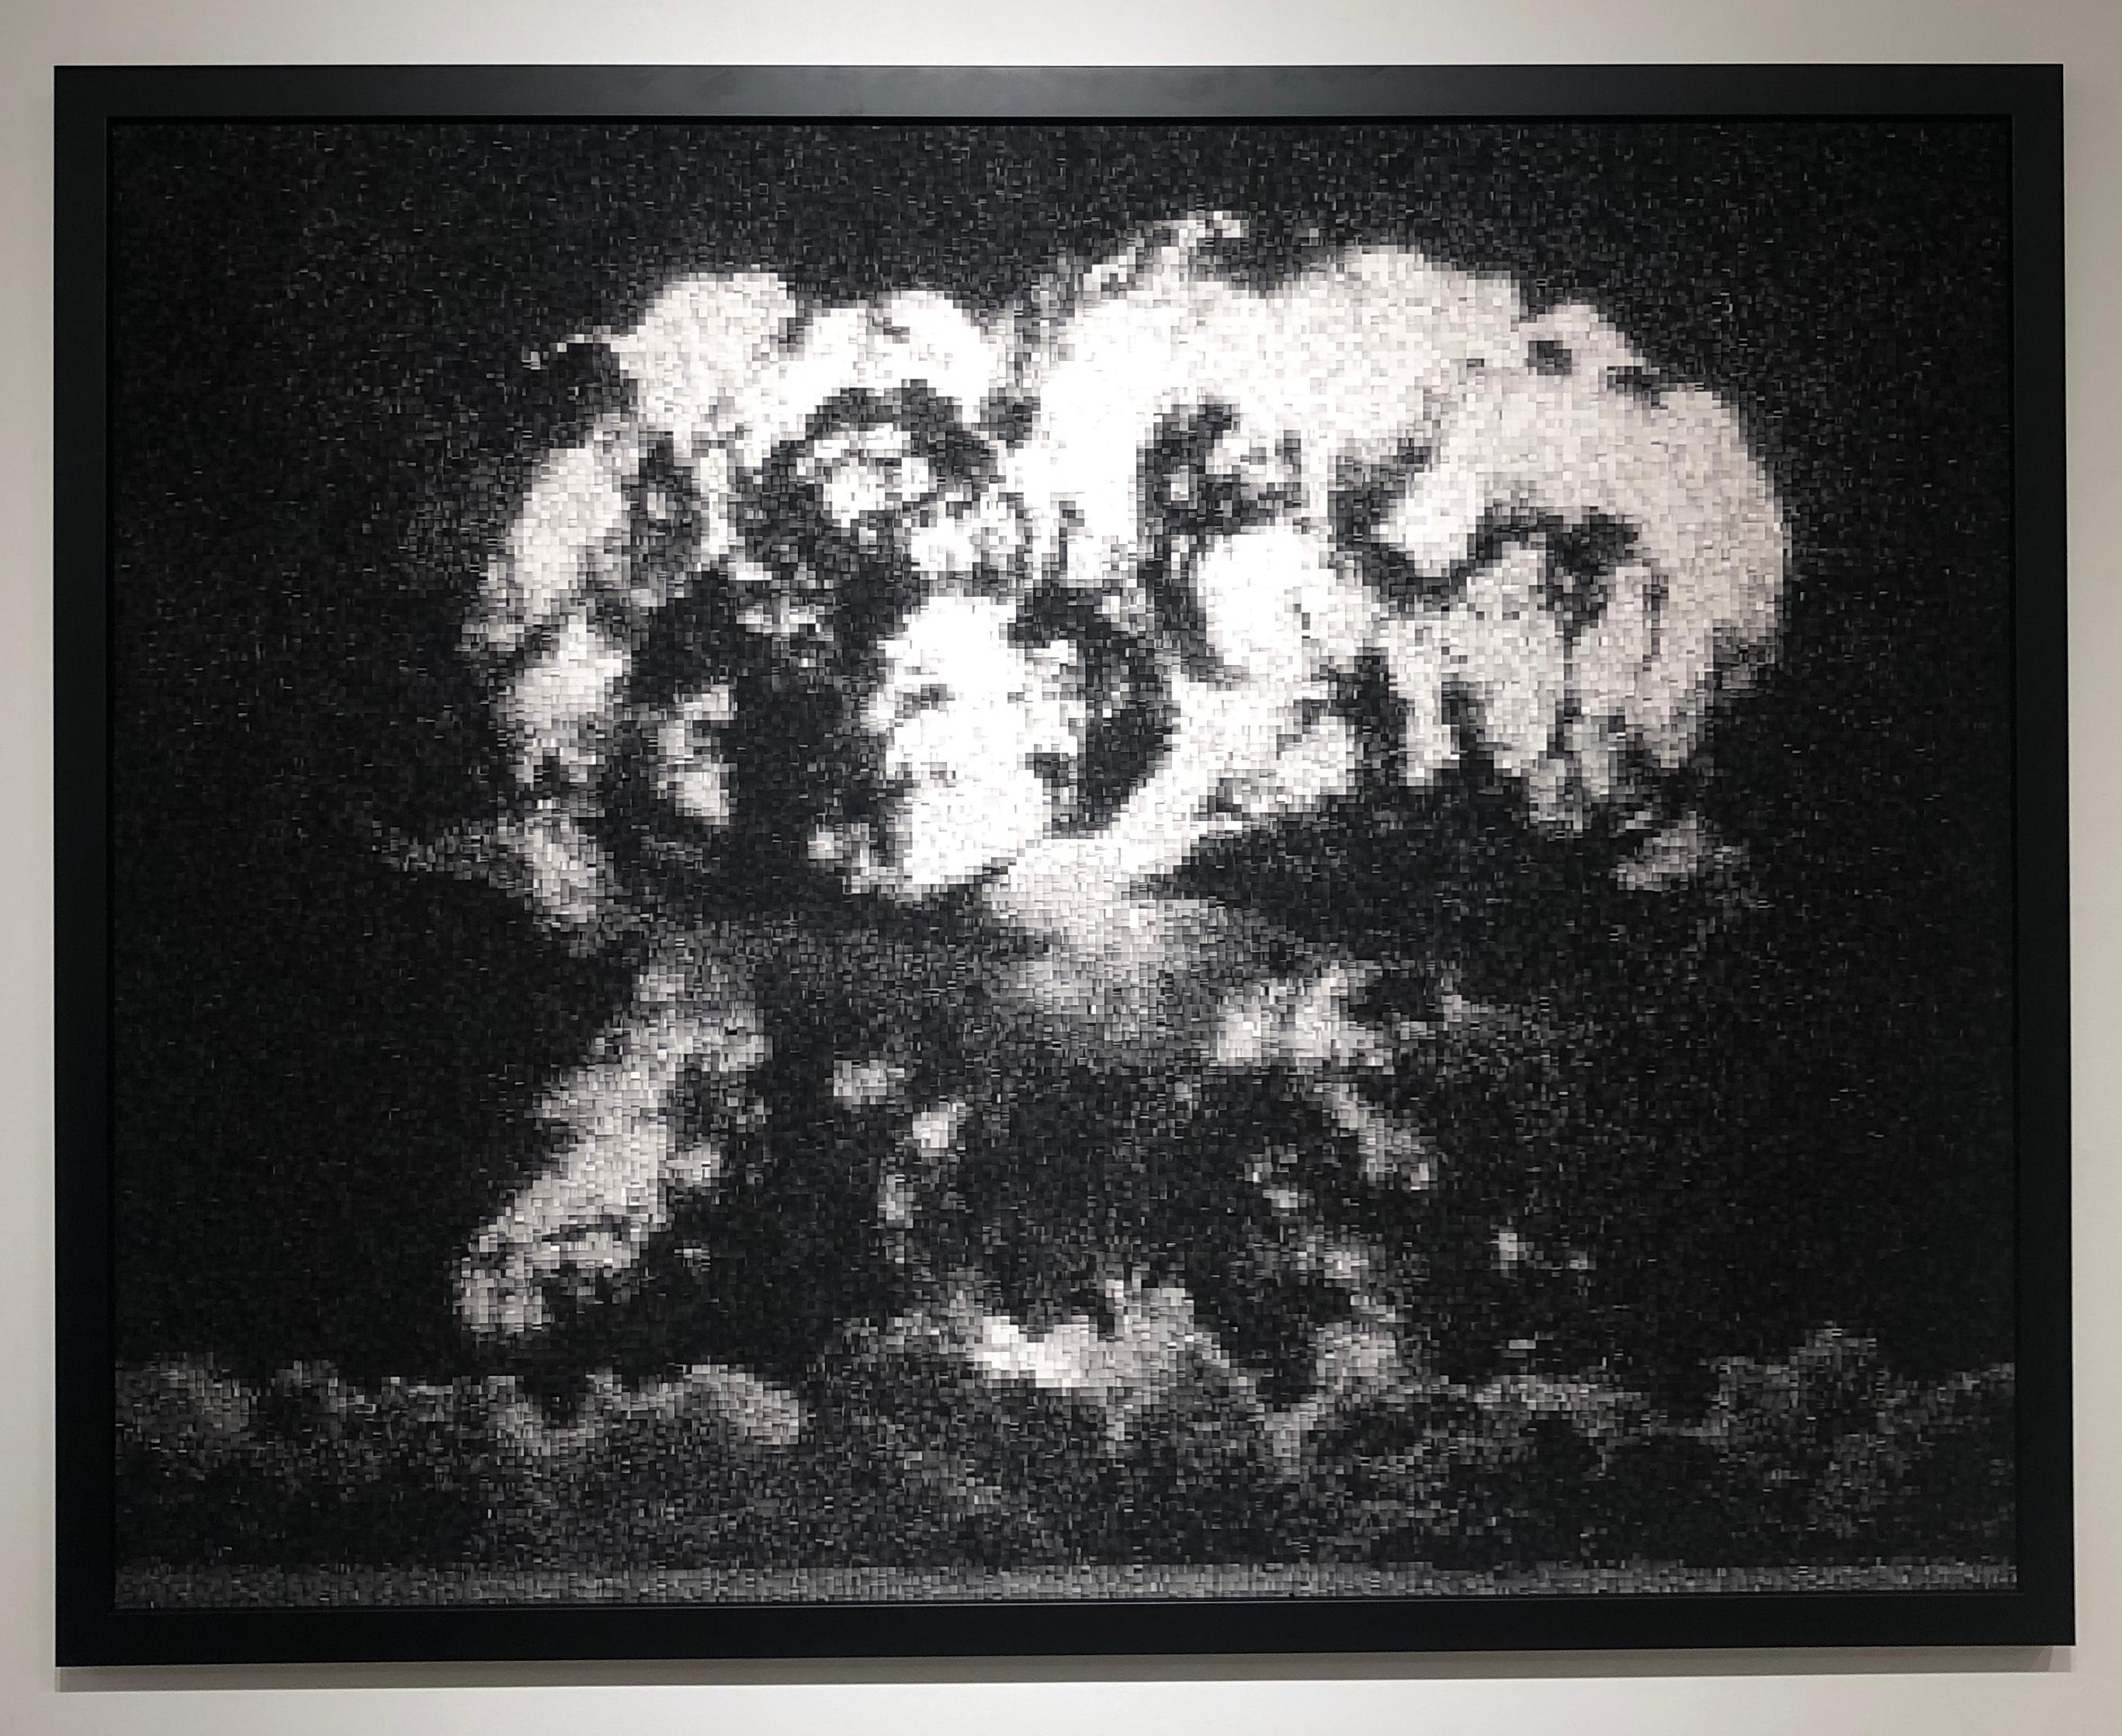 Operation Hardtack: Apple, Pixelated Image of Declassified Military Testing - Print by Jan Pieter Fokkens